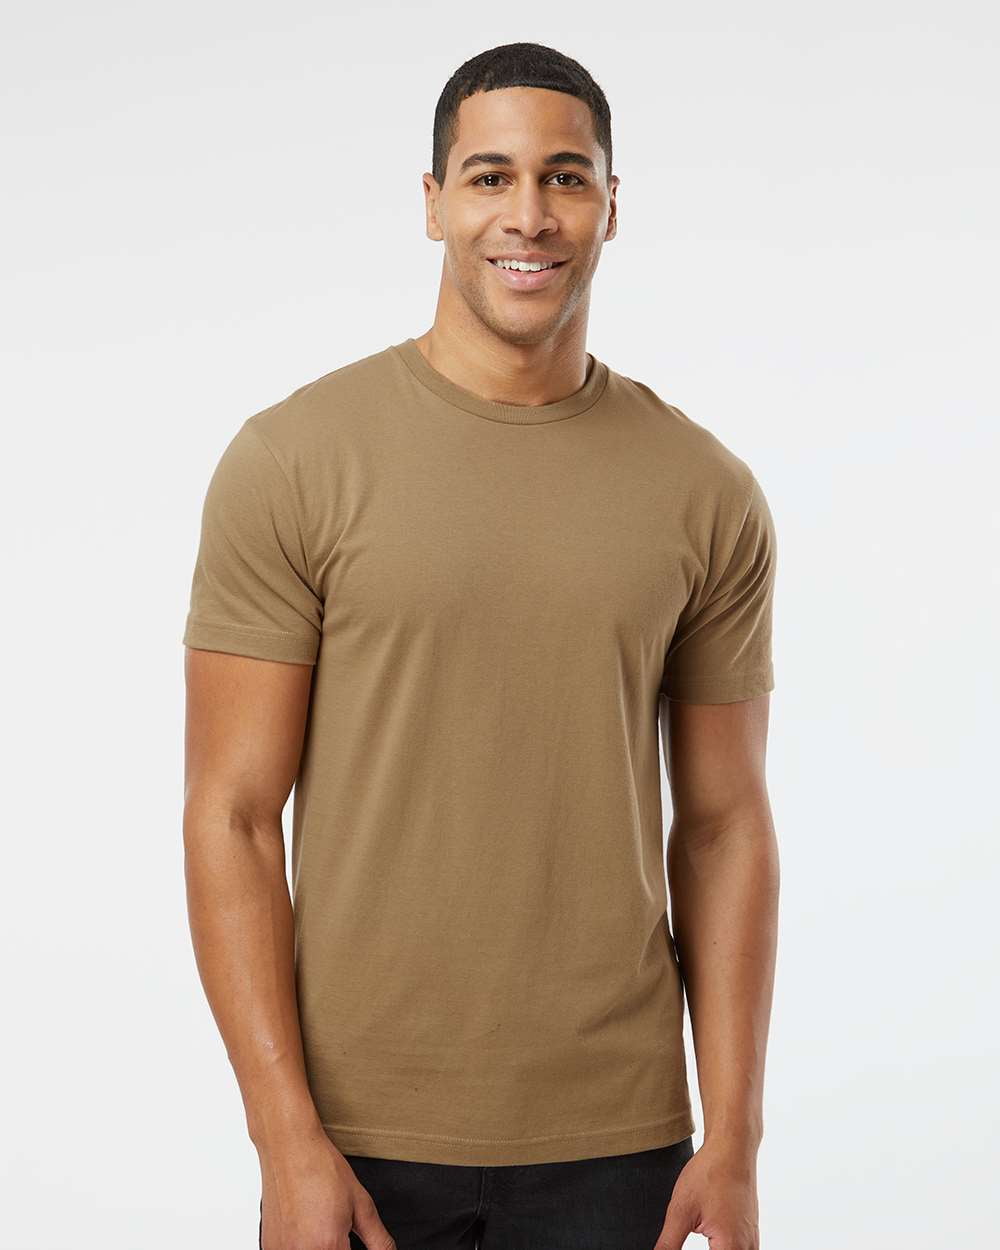 LAT - Fine Jersey Tee - 6901 - Coyote Brown - Size: 3XL